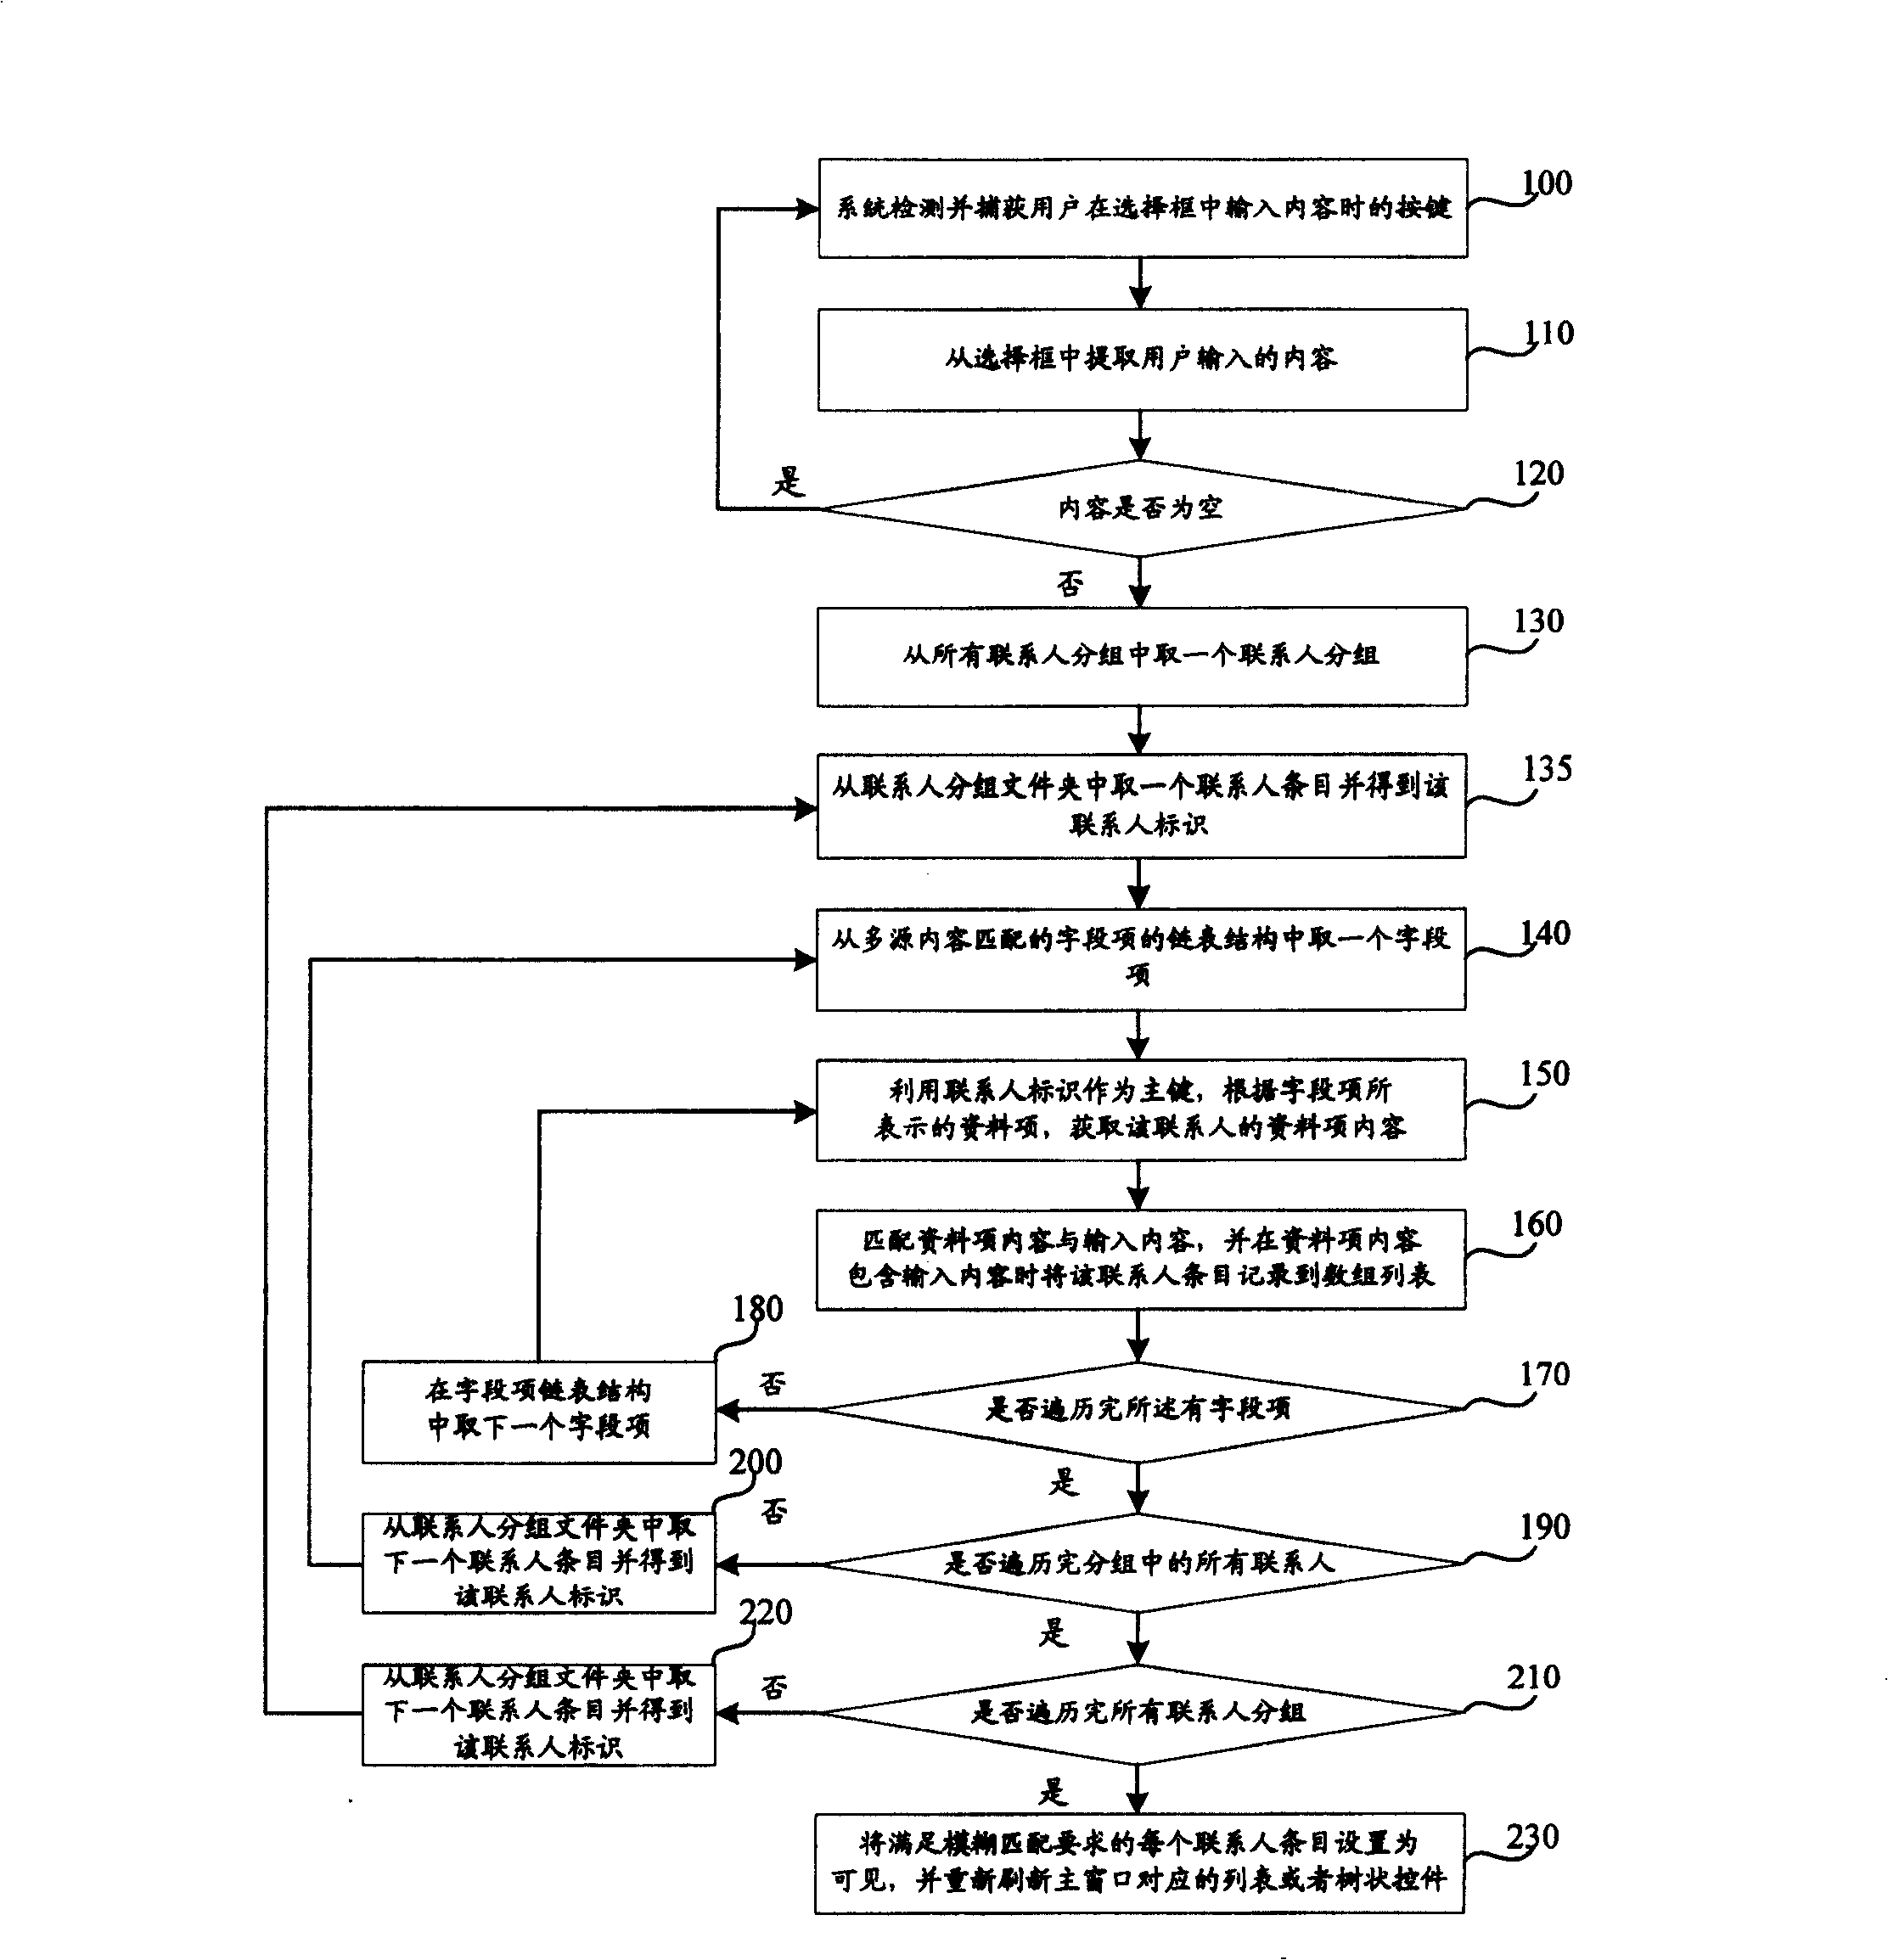 Method and apparatus for matching associated person information